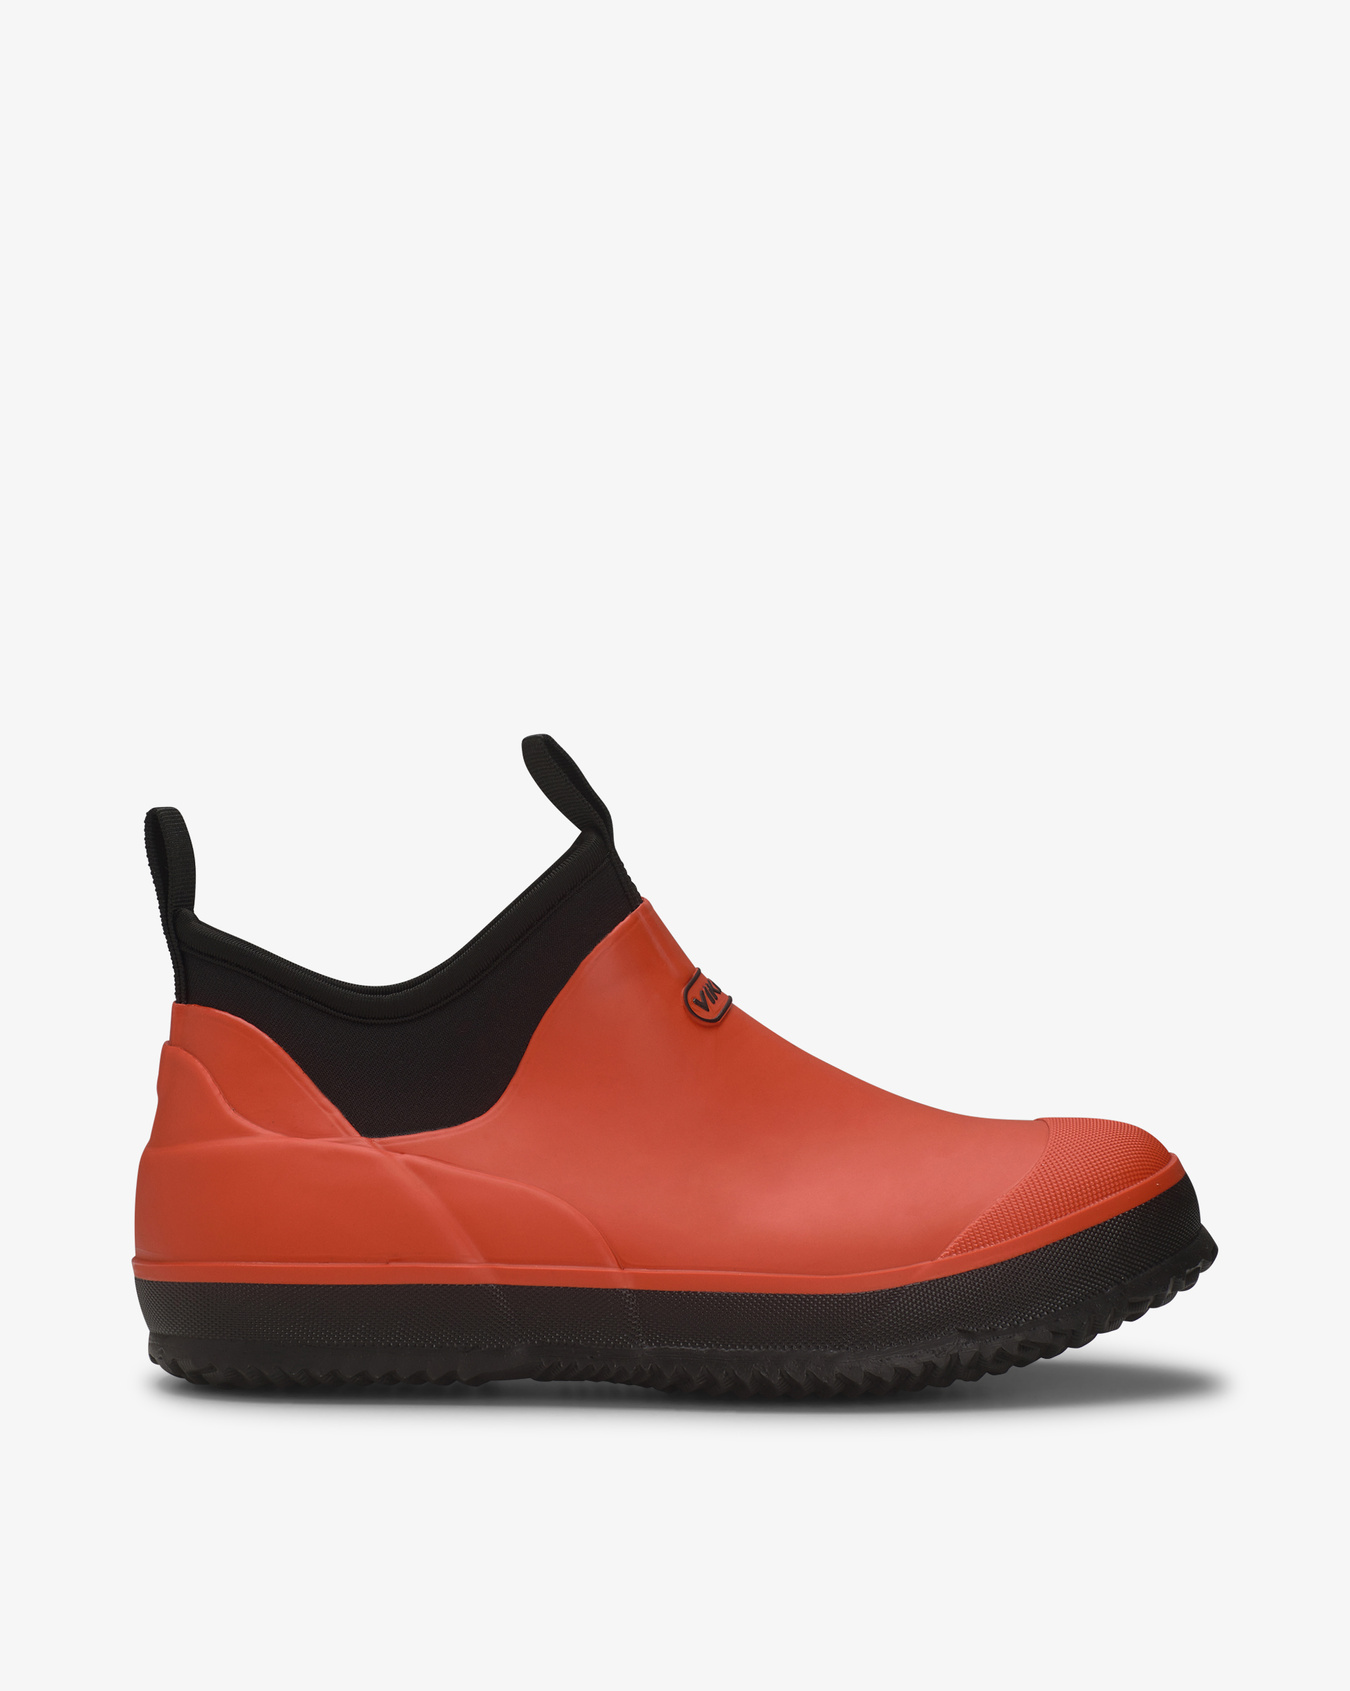 Paveport Red/Black Rubber Boot